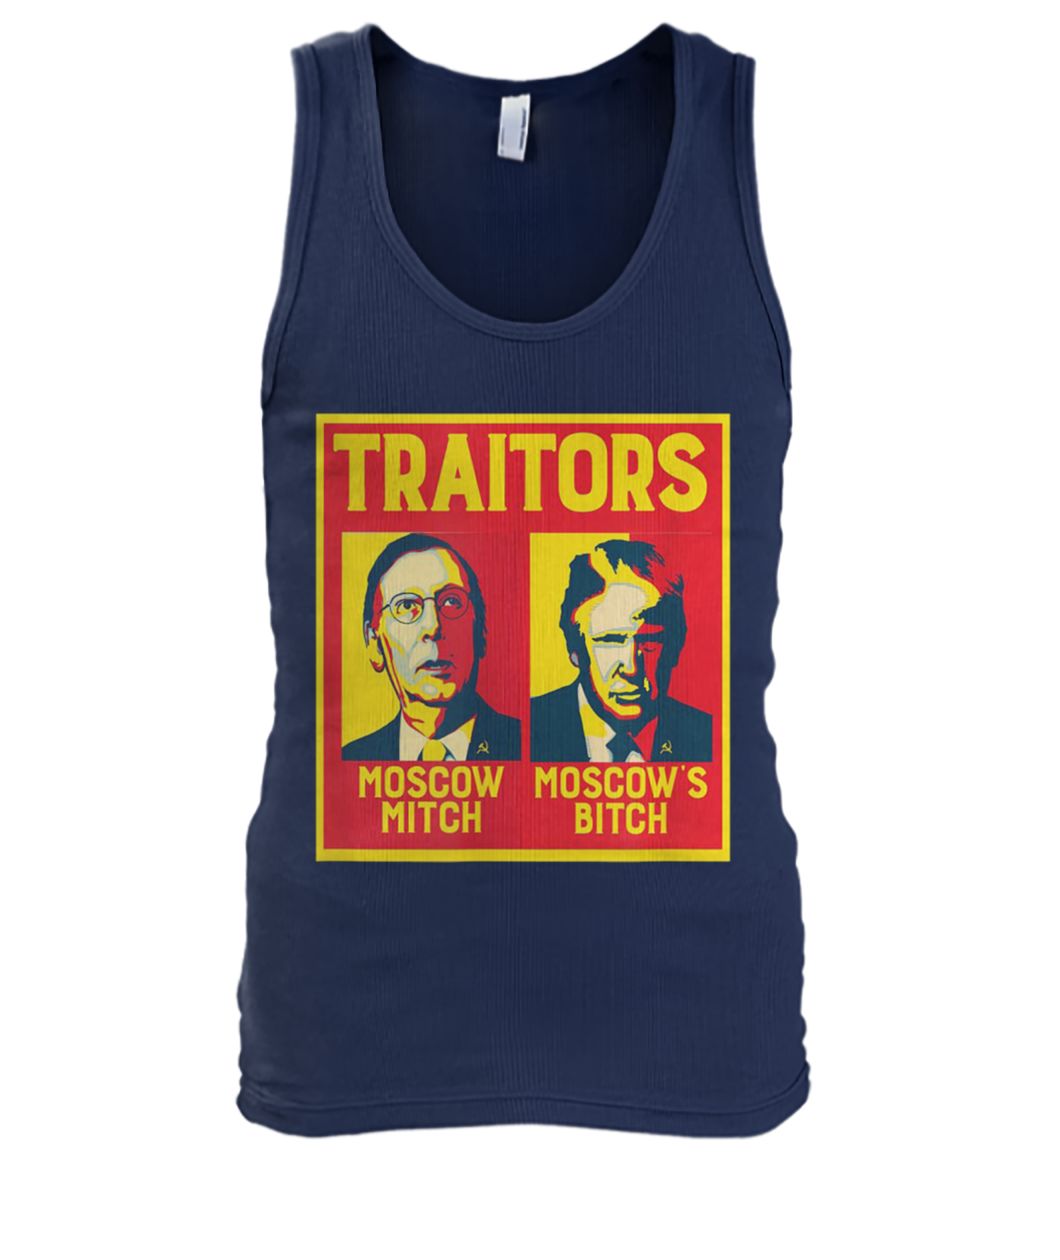 Traitors ditch moscow mitch moscow's bitch men's tank top